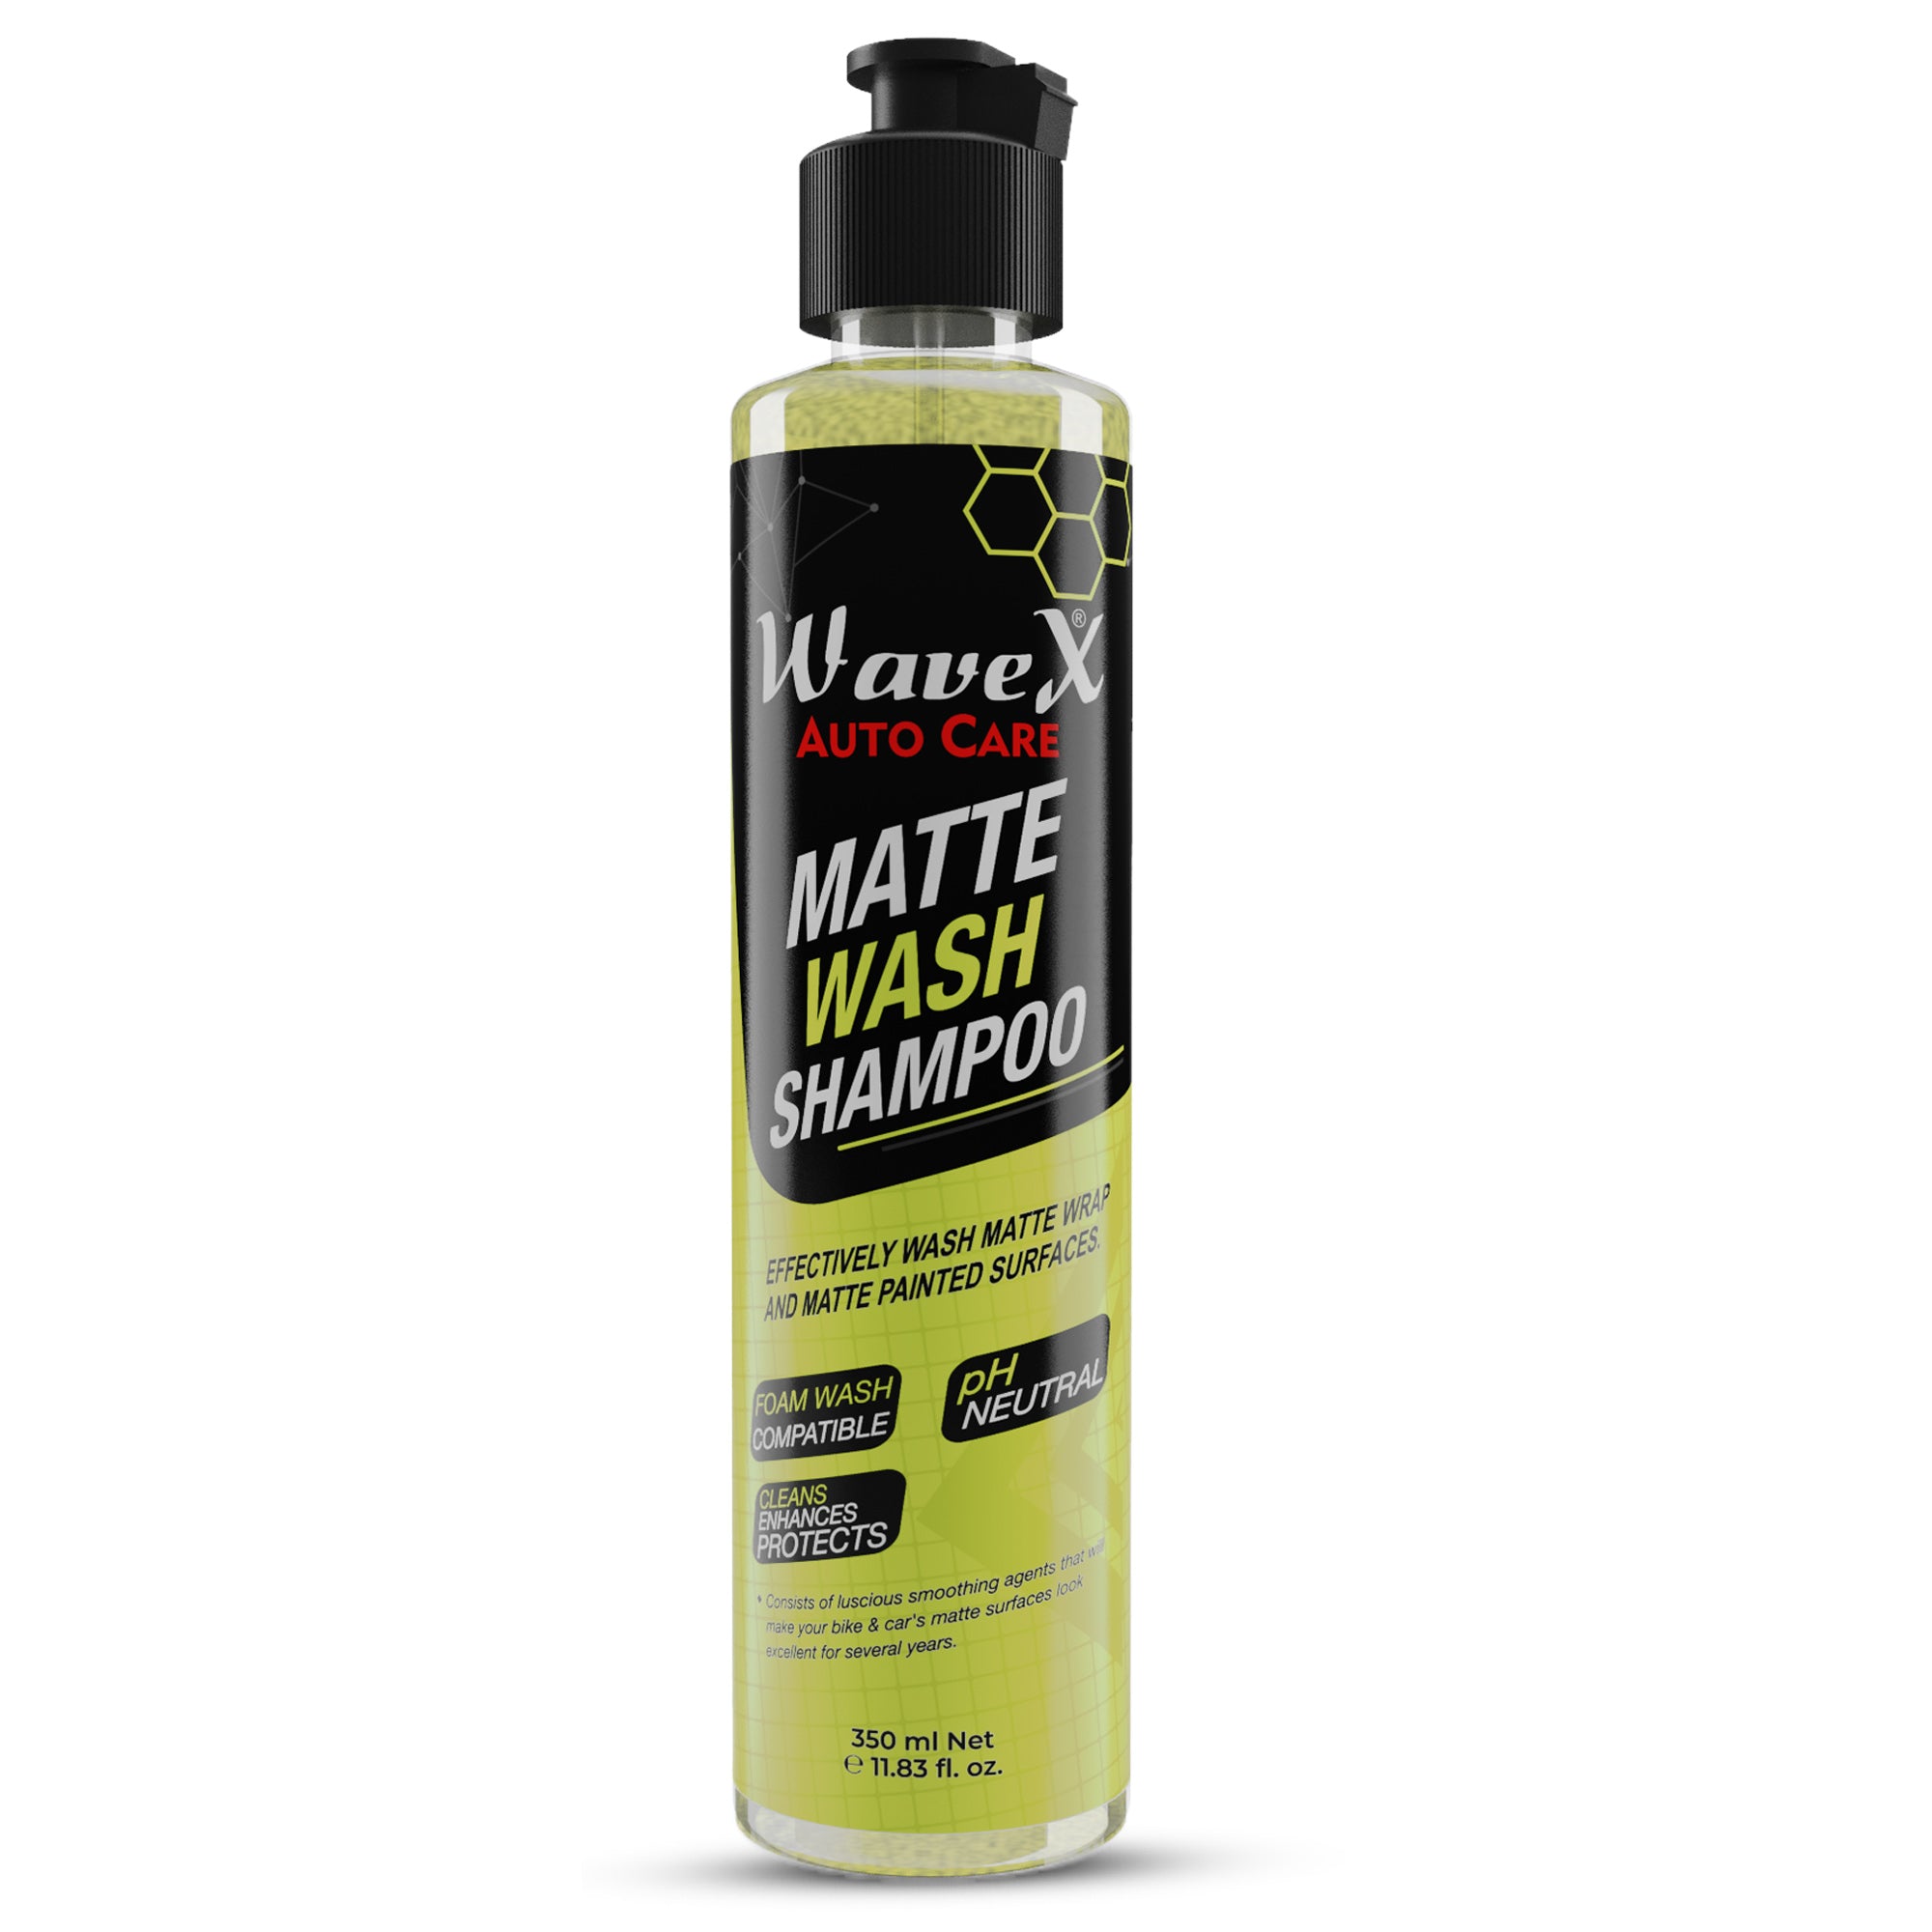 Matte Finish Maintainer 350 ml Combo, Wash, Clean, Protect and Maintain Matte Bikes and Cars, Consists of WaveX Matte Wash Shampoo, Matte Finish Maintainer, Microfiber Cloth & Chrome & Metal Polish 100ml